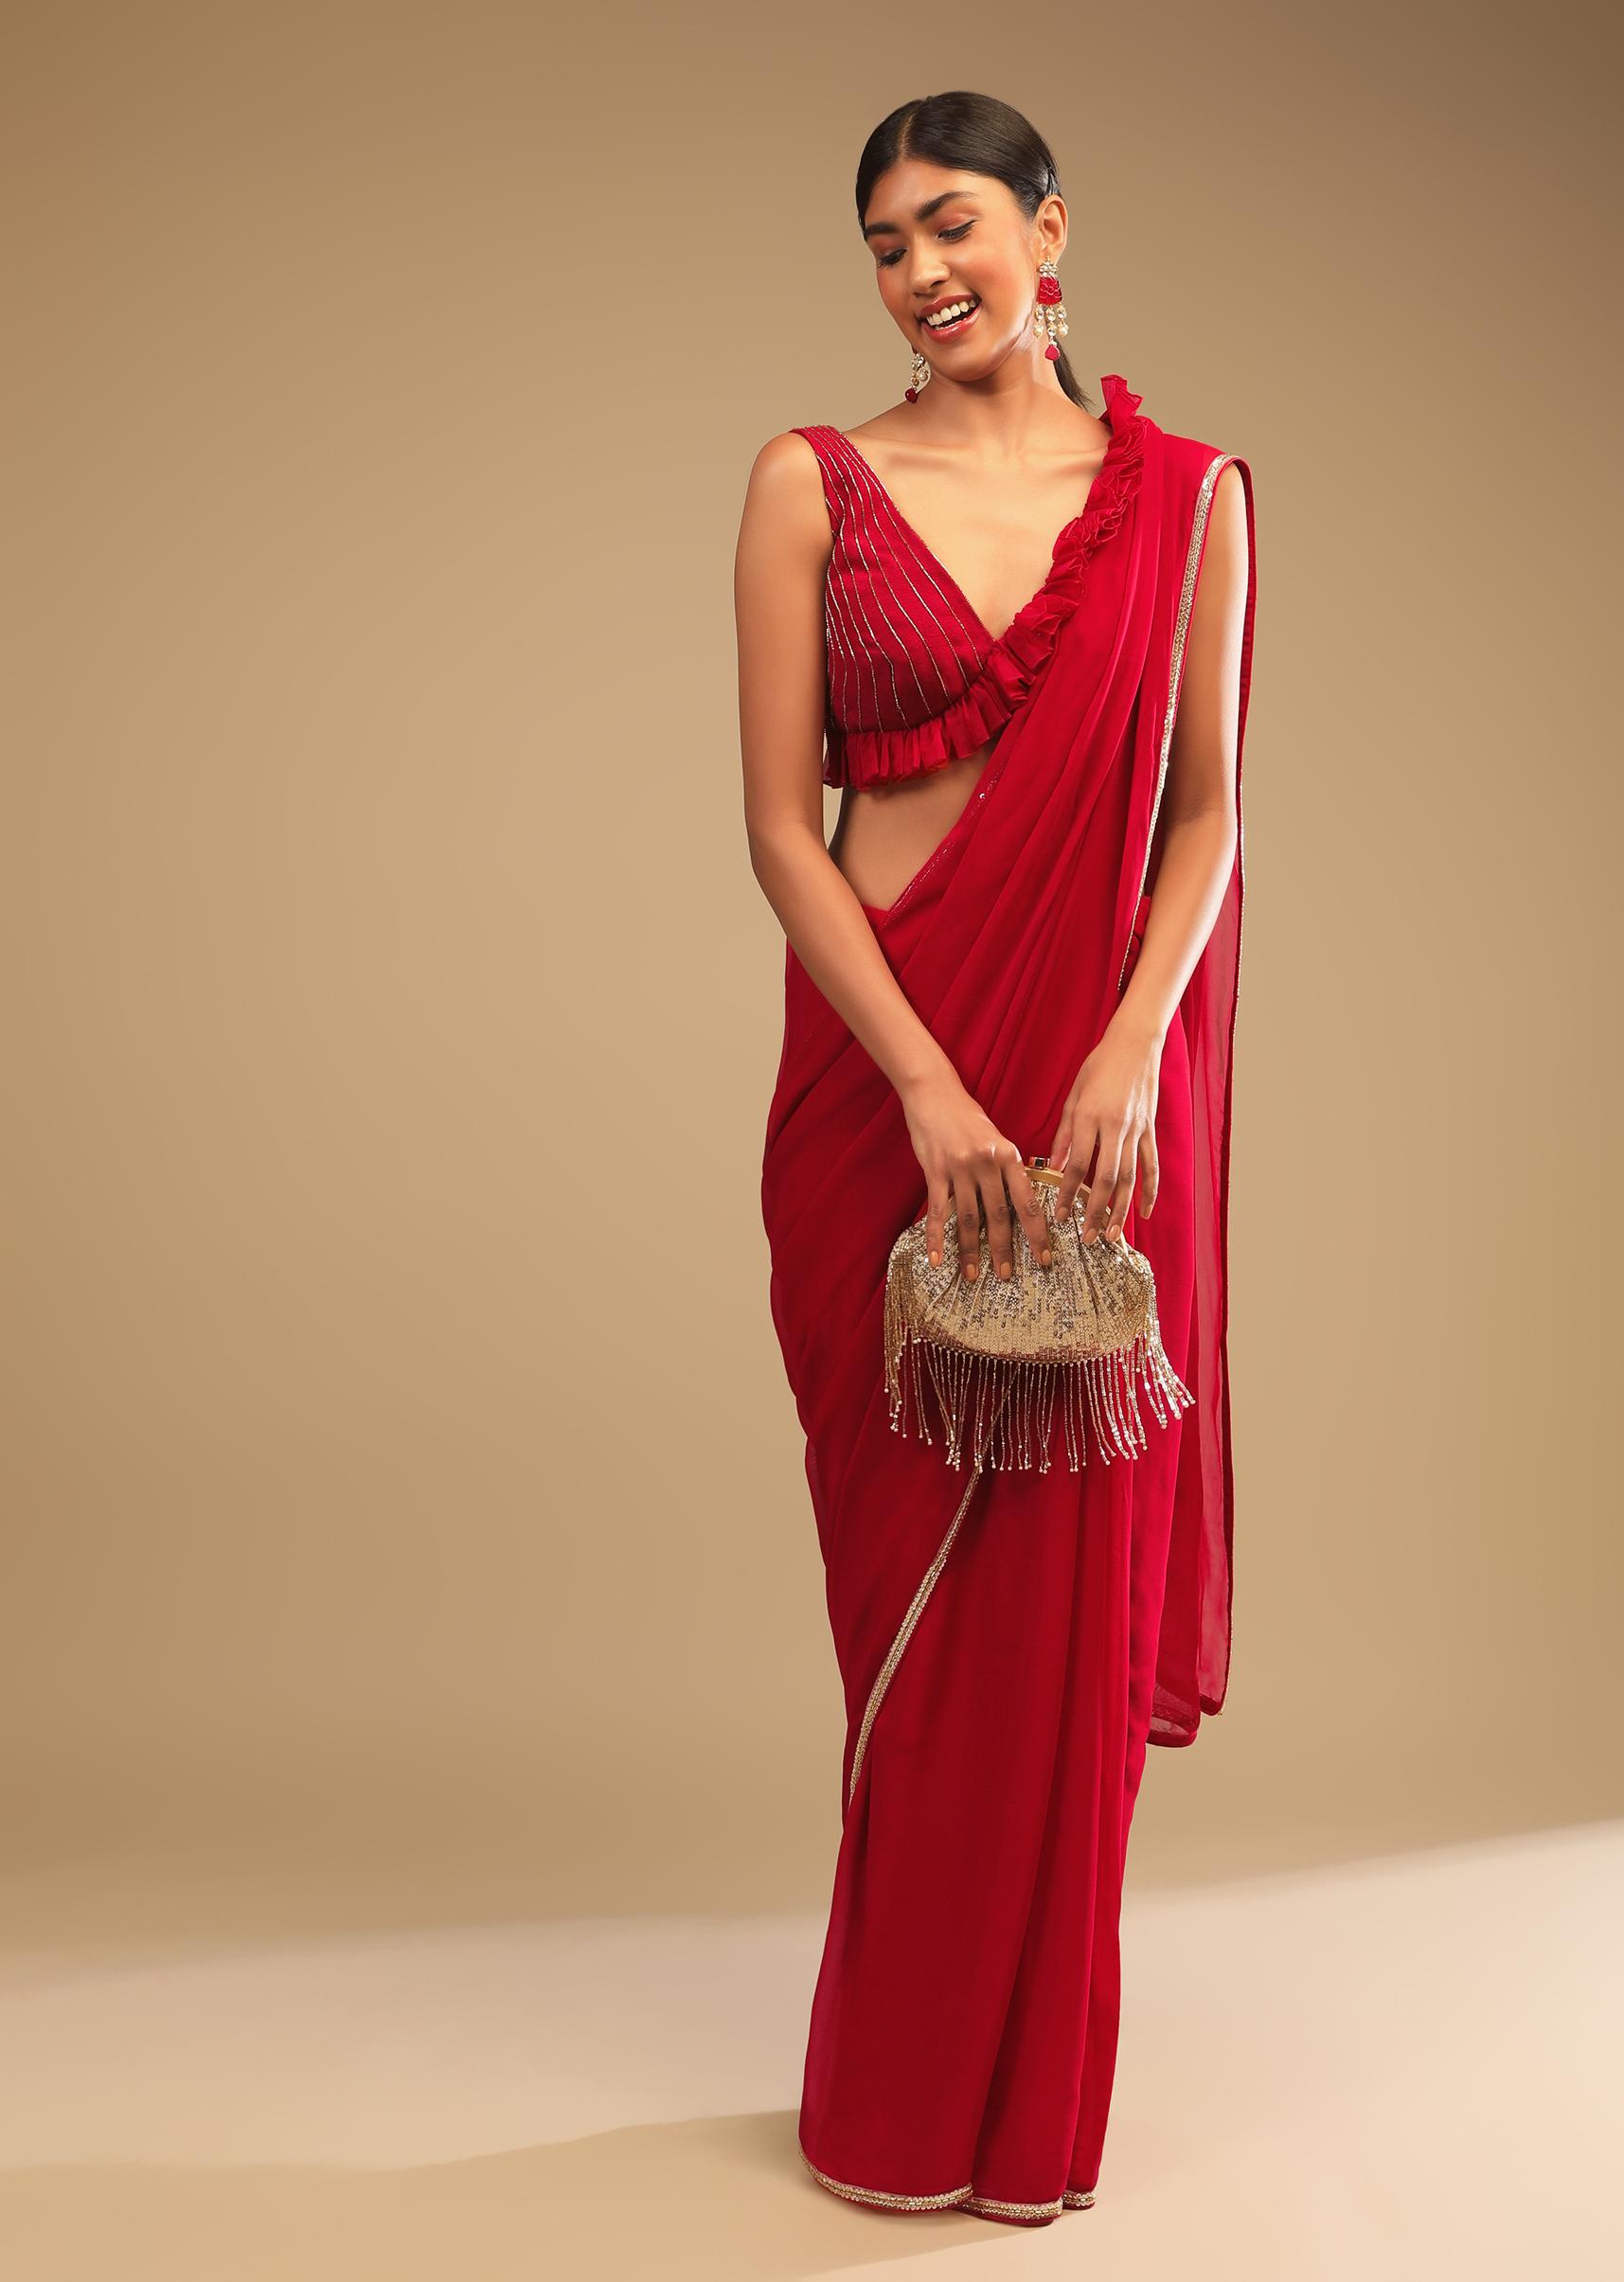 Kalki Fashion,M001TR342Y-SG64570,Cherry Red Saree In Georgette With Sequins And Cut Dana Embellished Border And A Ruffle Frill Adorned Crop Top